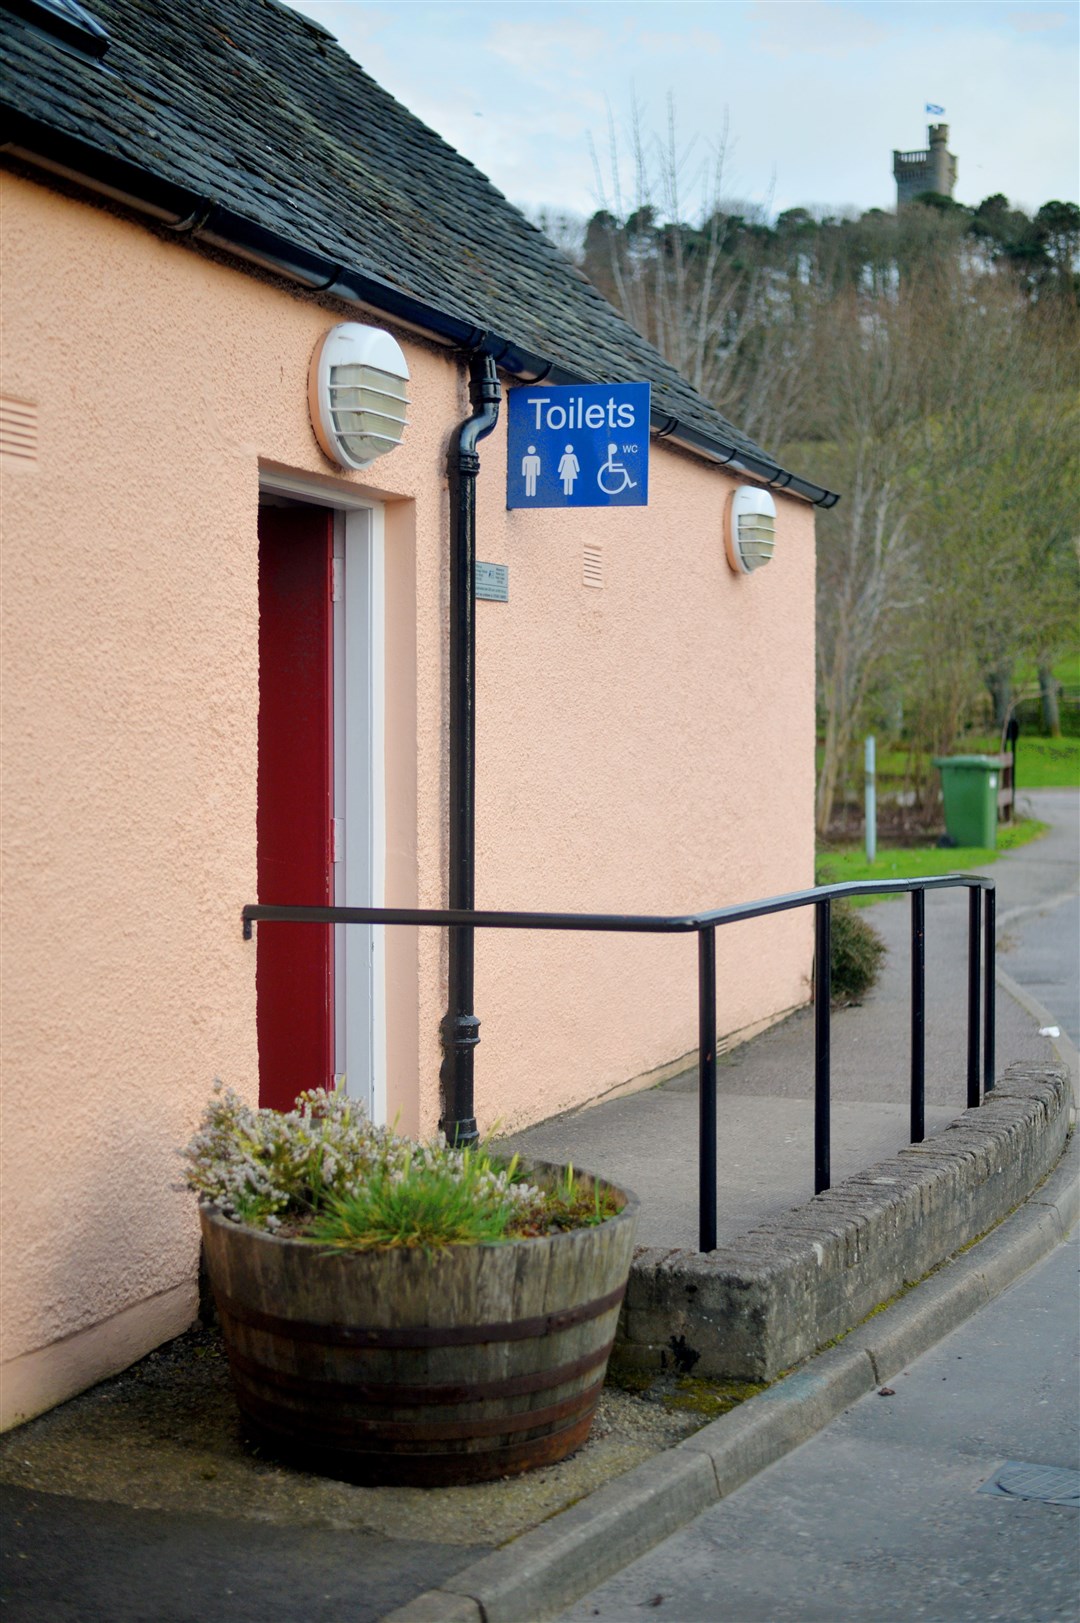 The fire-raising incident affected the Dingwall public toilets at Ormidale Place in the town centre.